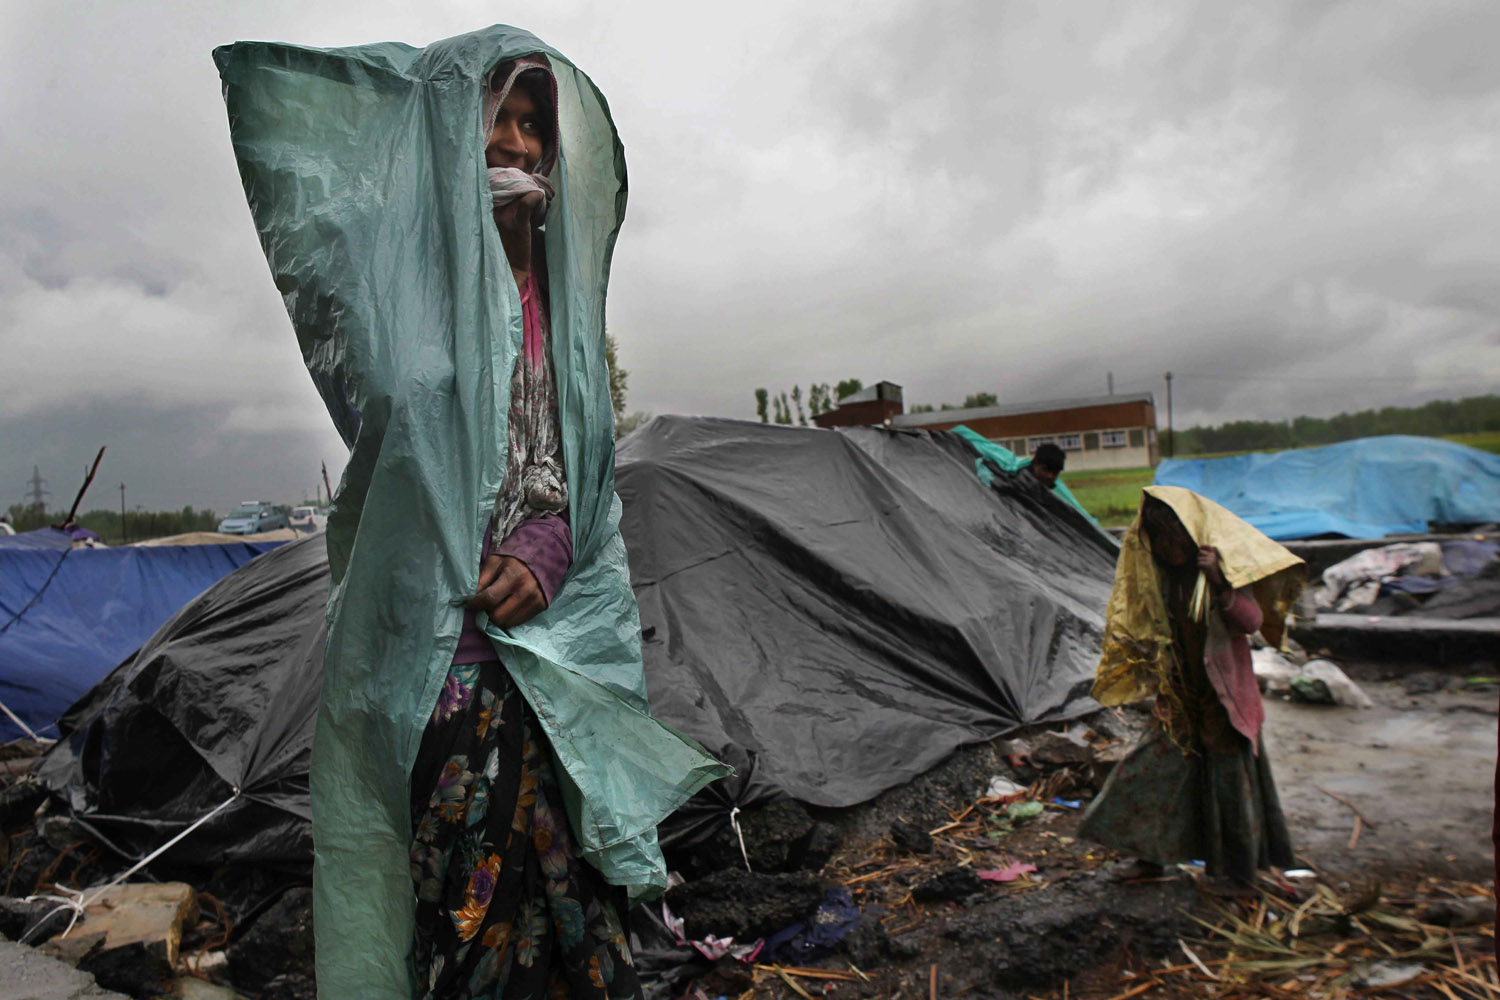 April 16, 2013. Two people living in a slum cover themselves in plastic sheets to protect themselves from the rain in Bijbehara, some 55 kilometres south of Srinagar, the summer capital of Indian-controlled Kashmir.